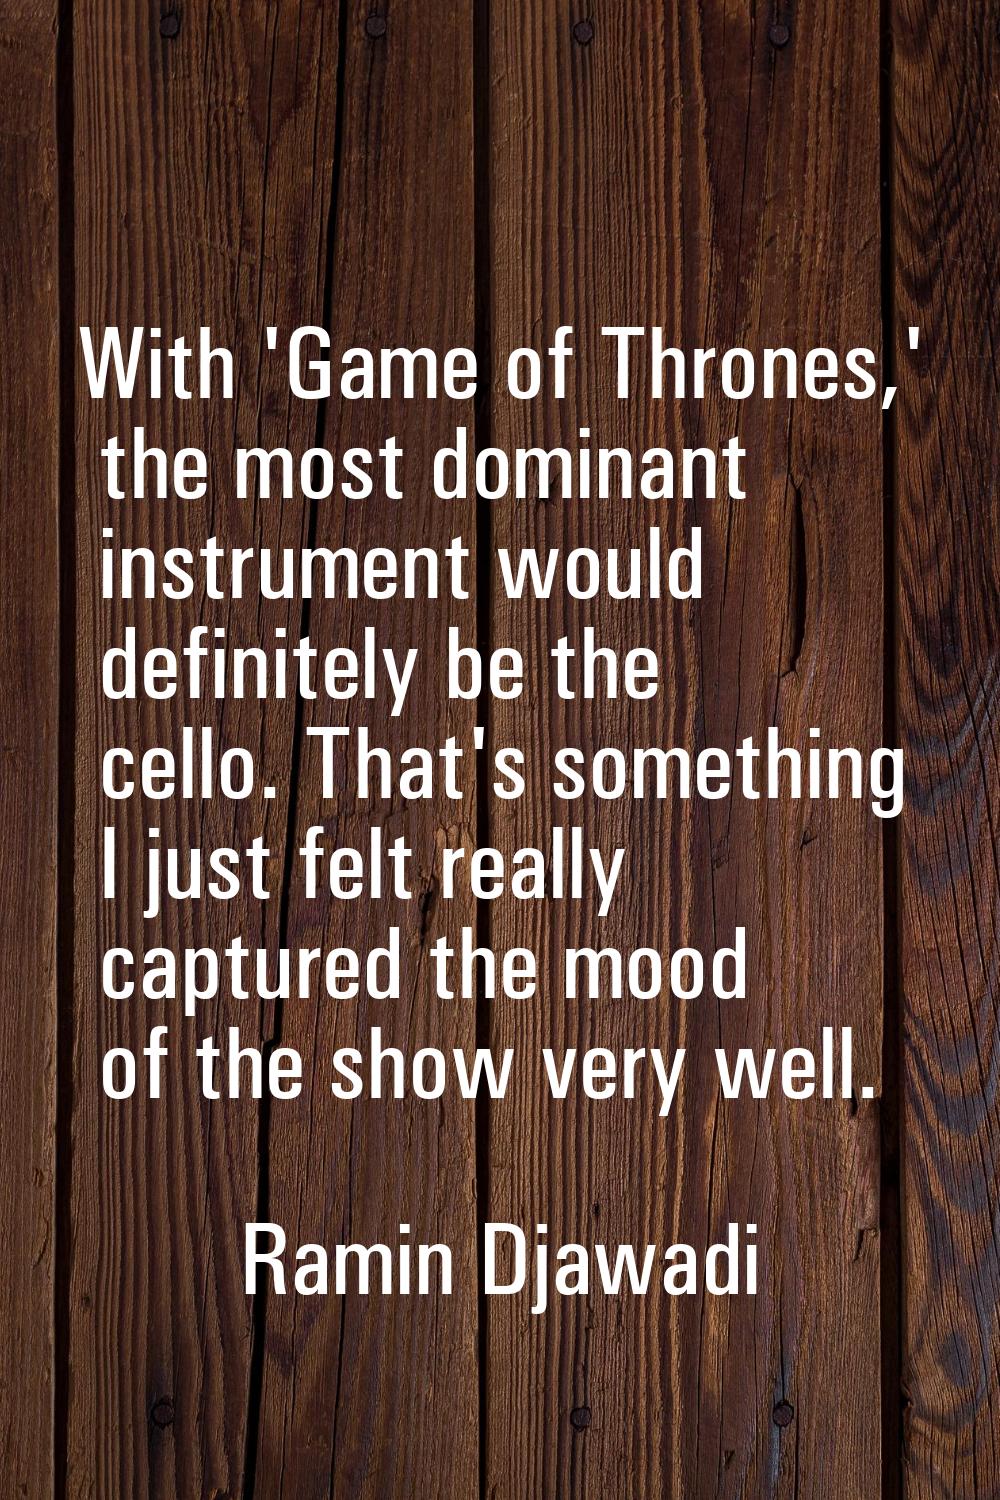 With 'Game of Thrones,' the most dominant instrument would definitely be the cello. That's somethin